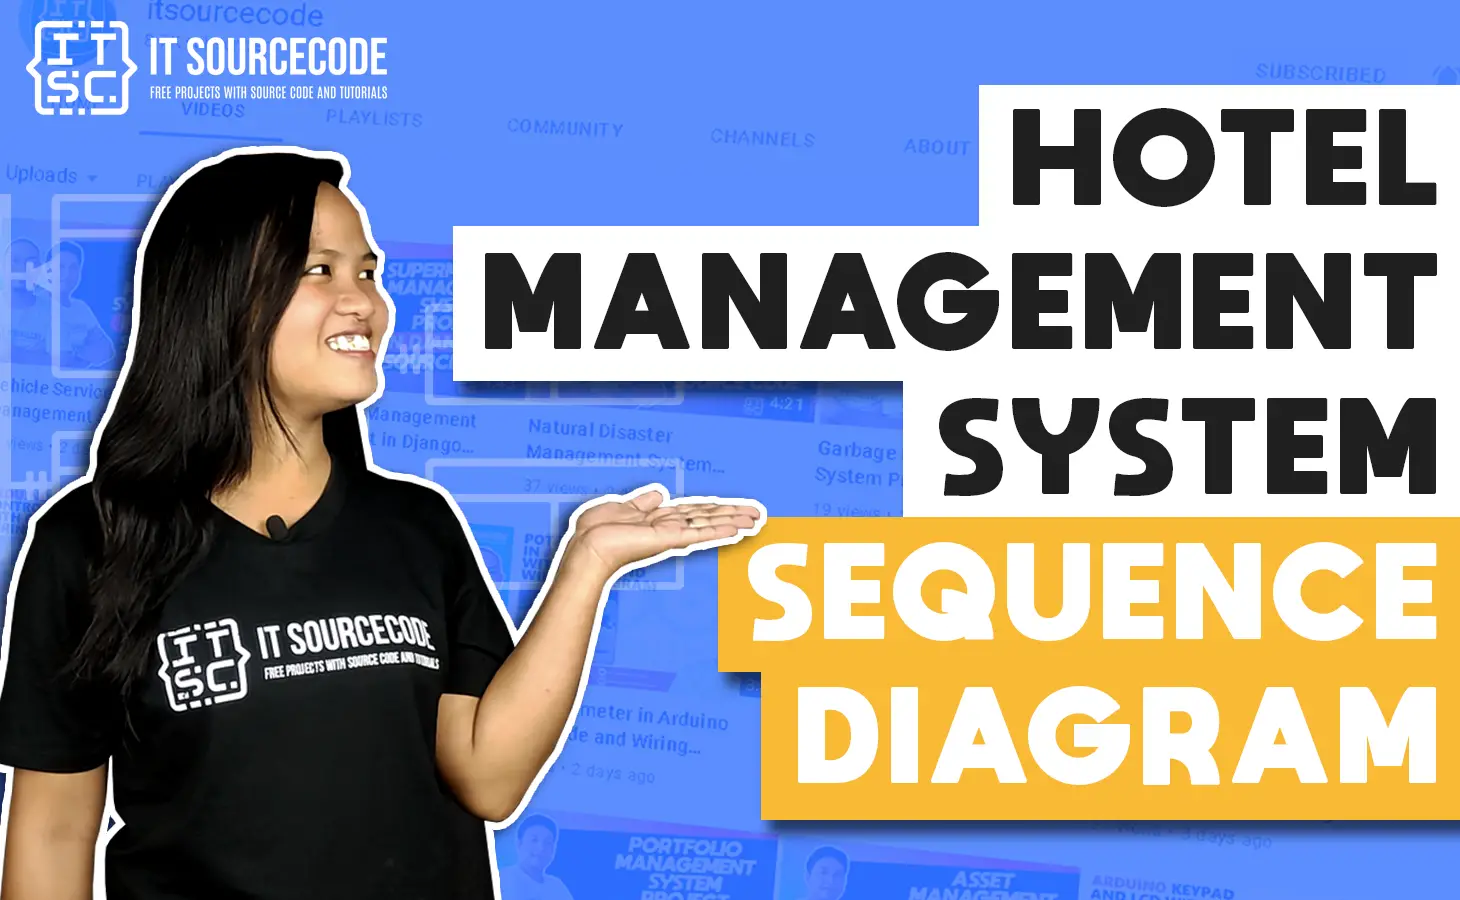 Sequence Diagram for Hotel Management System